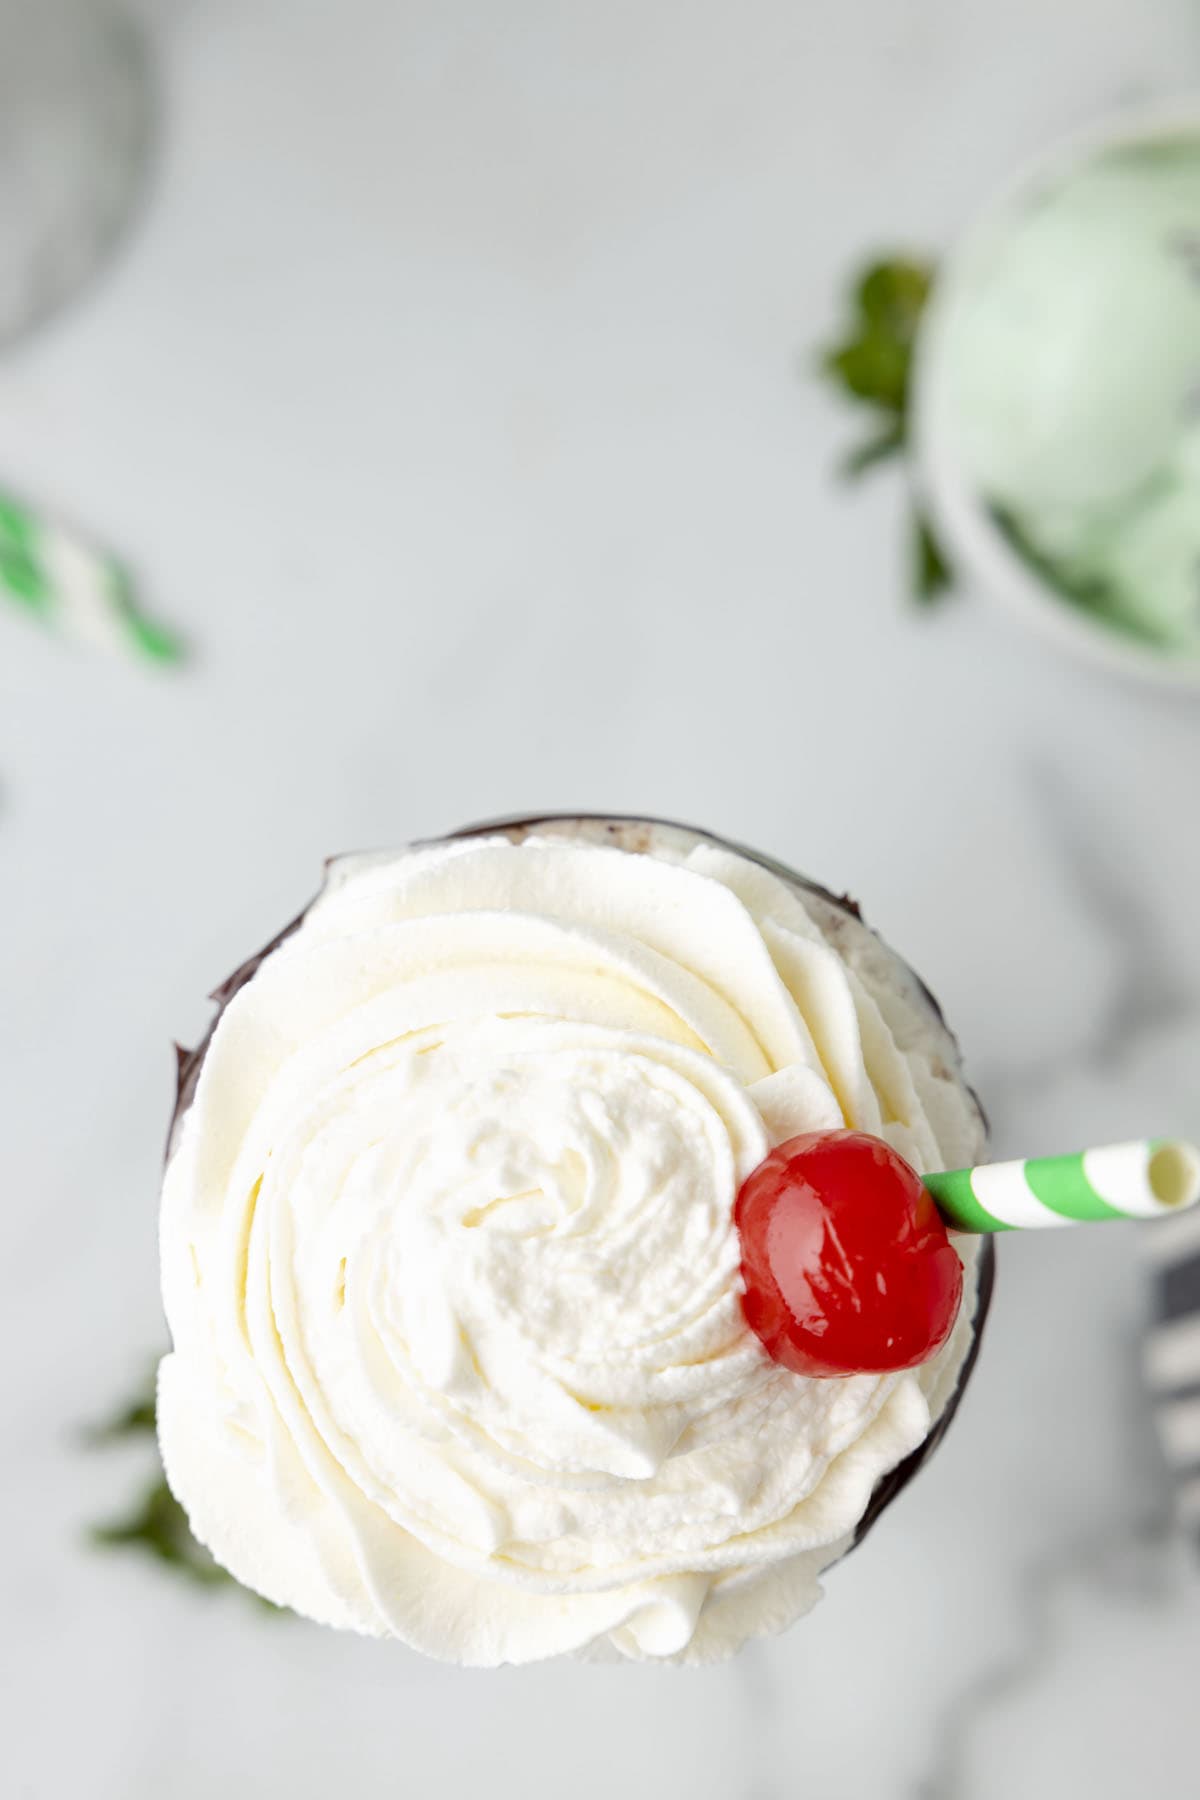 mint milkshake in a glass with lots of whipped cream on top and a cherry in the middle